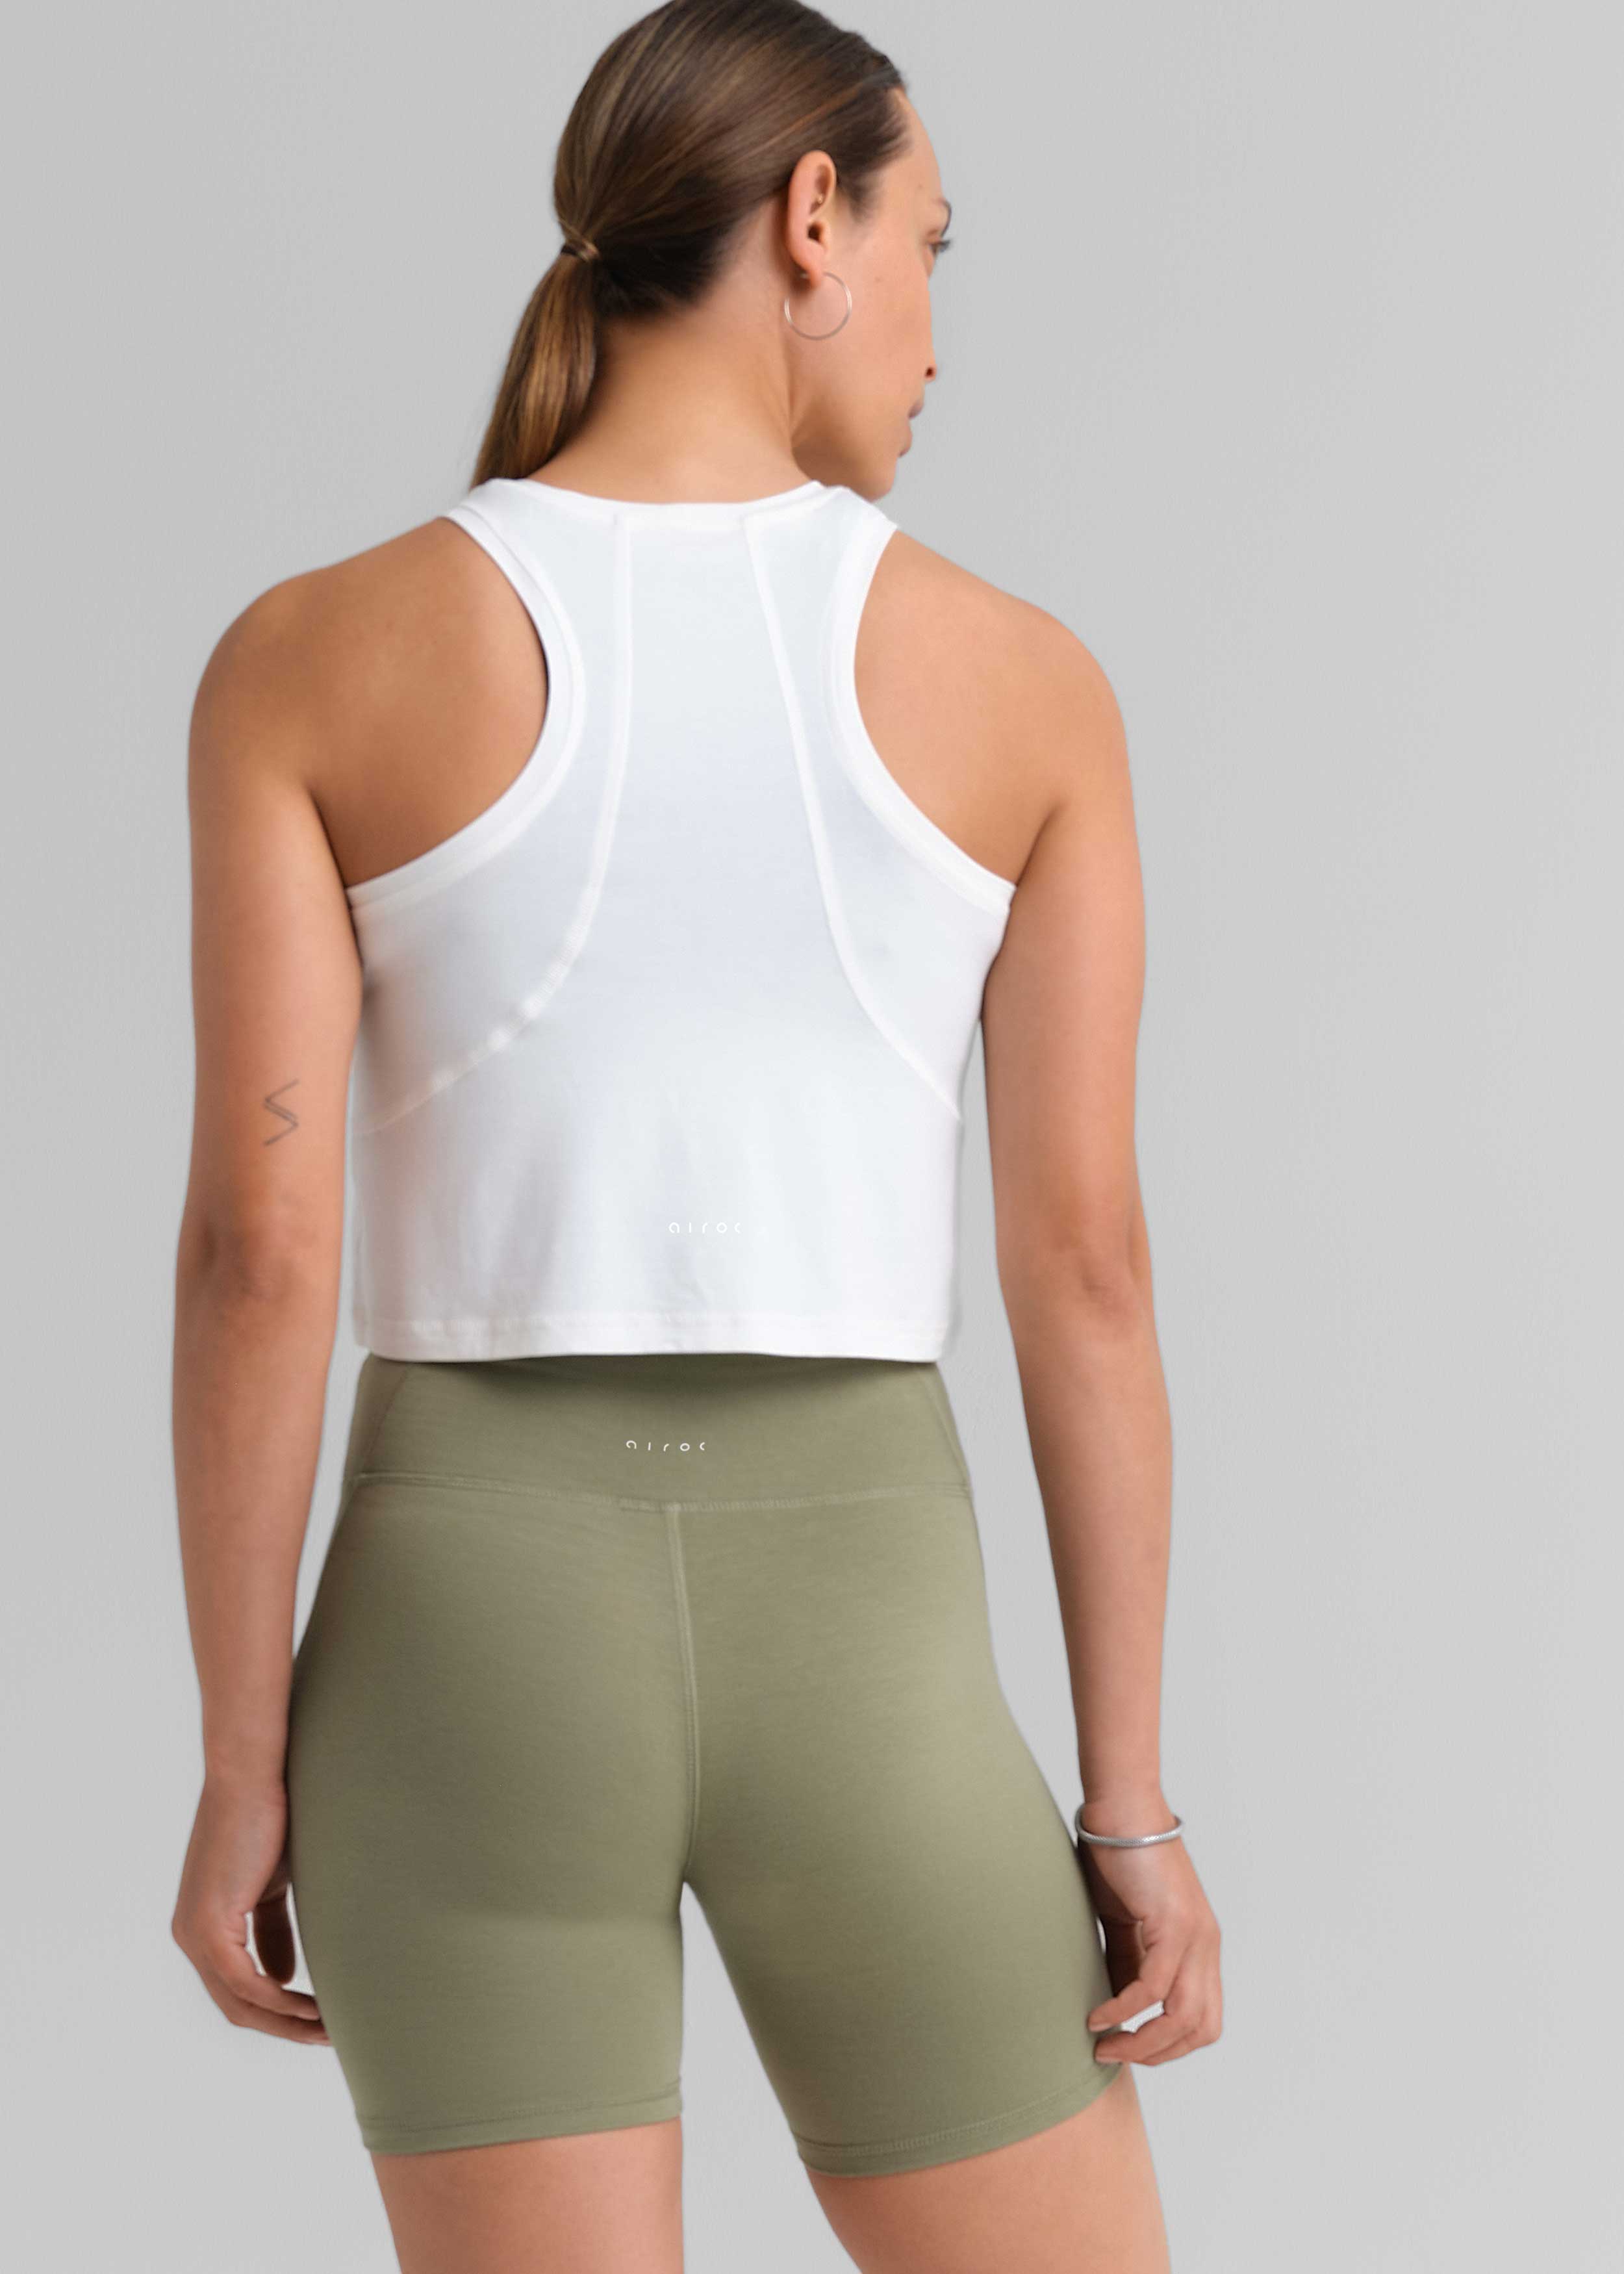 Women's Bamboo Airy Cropped Vest